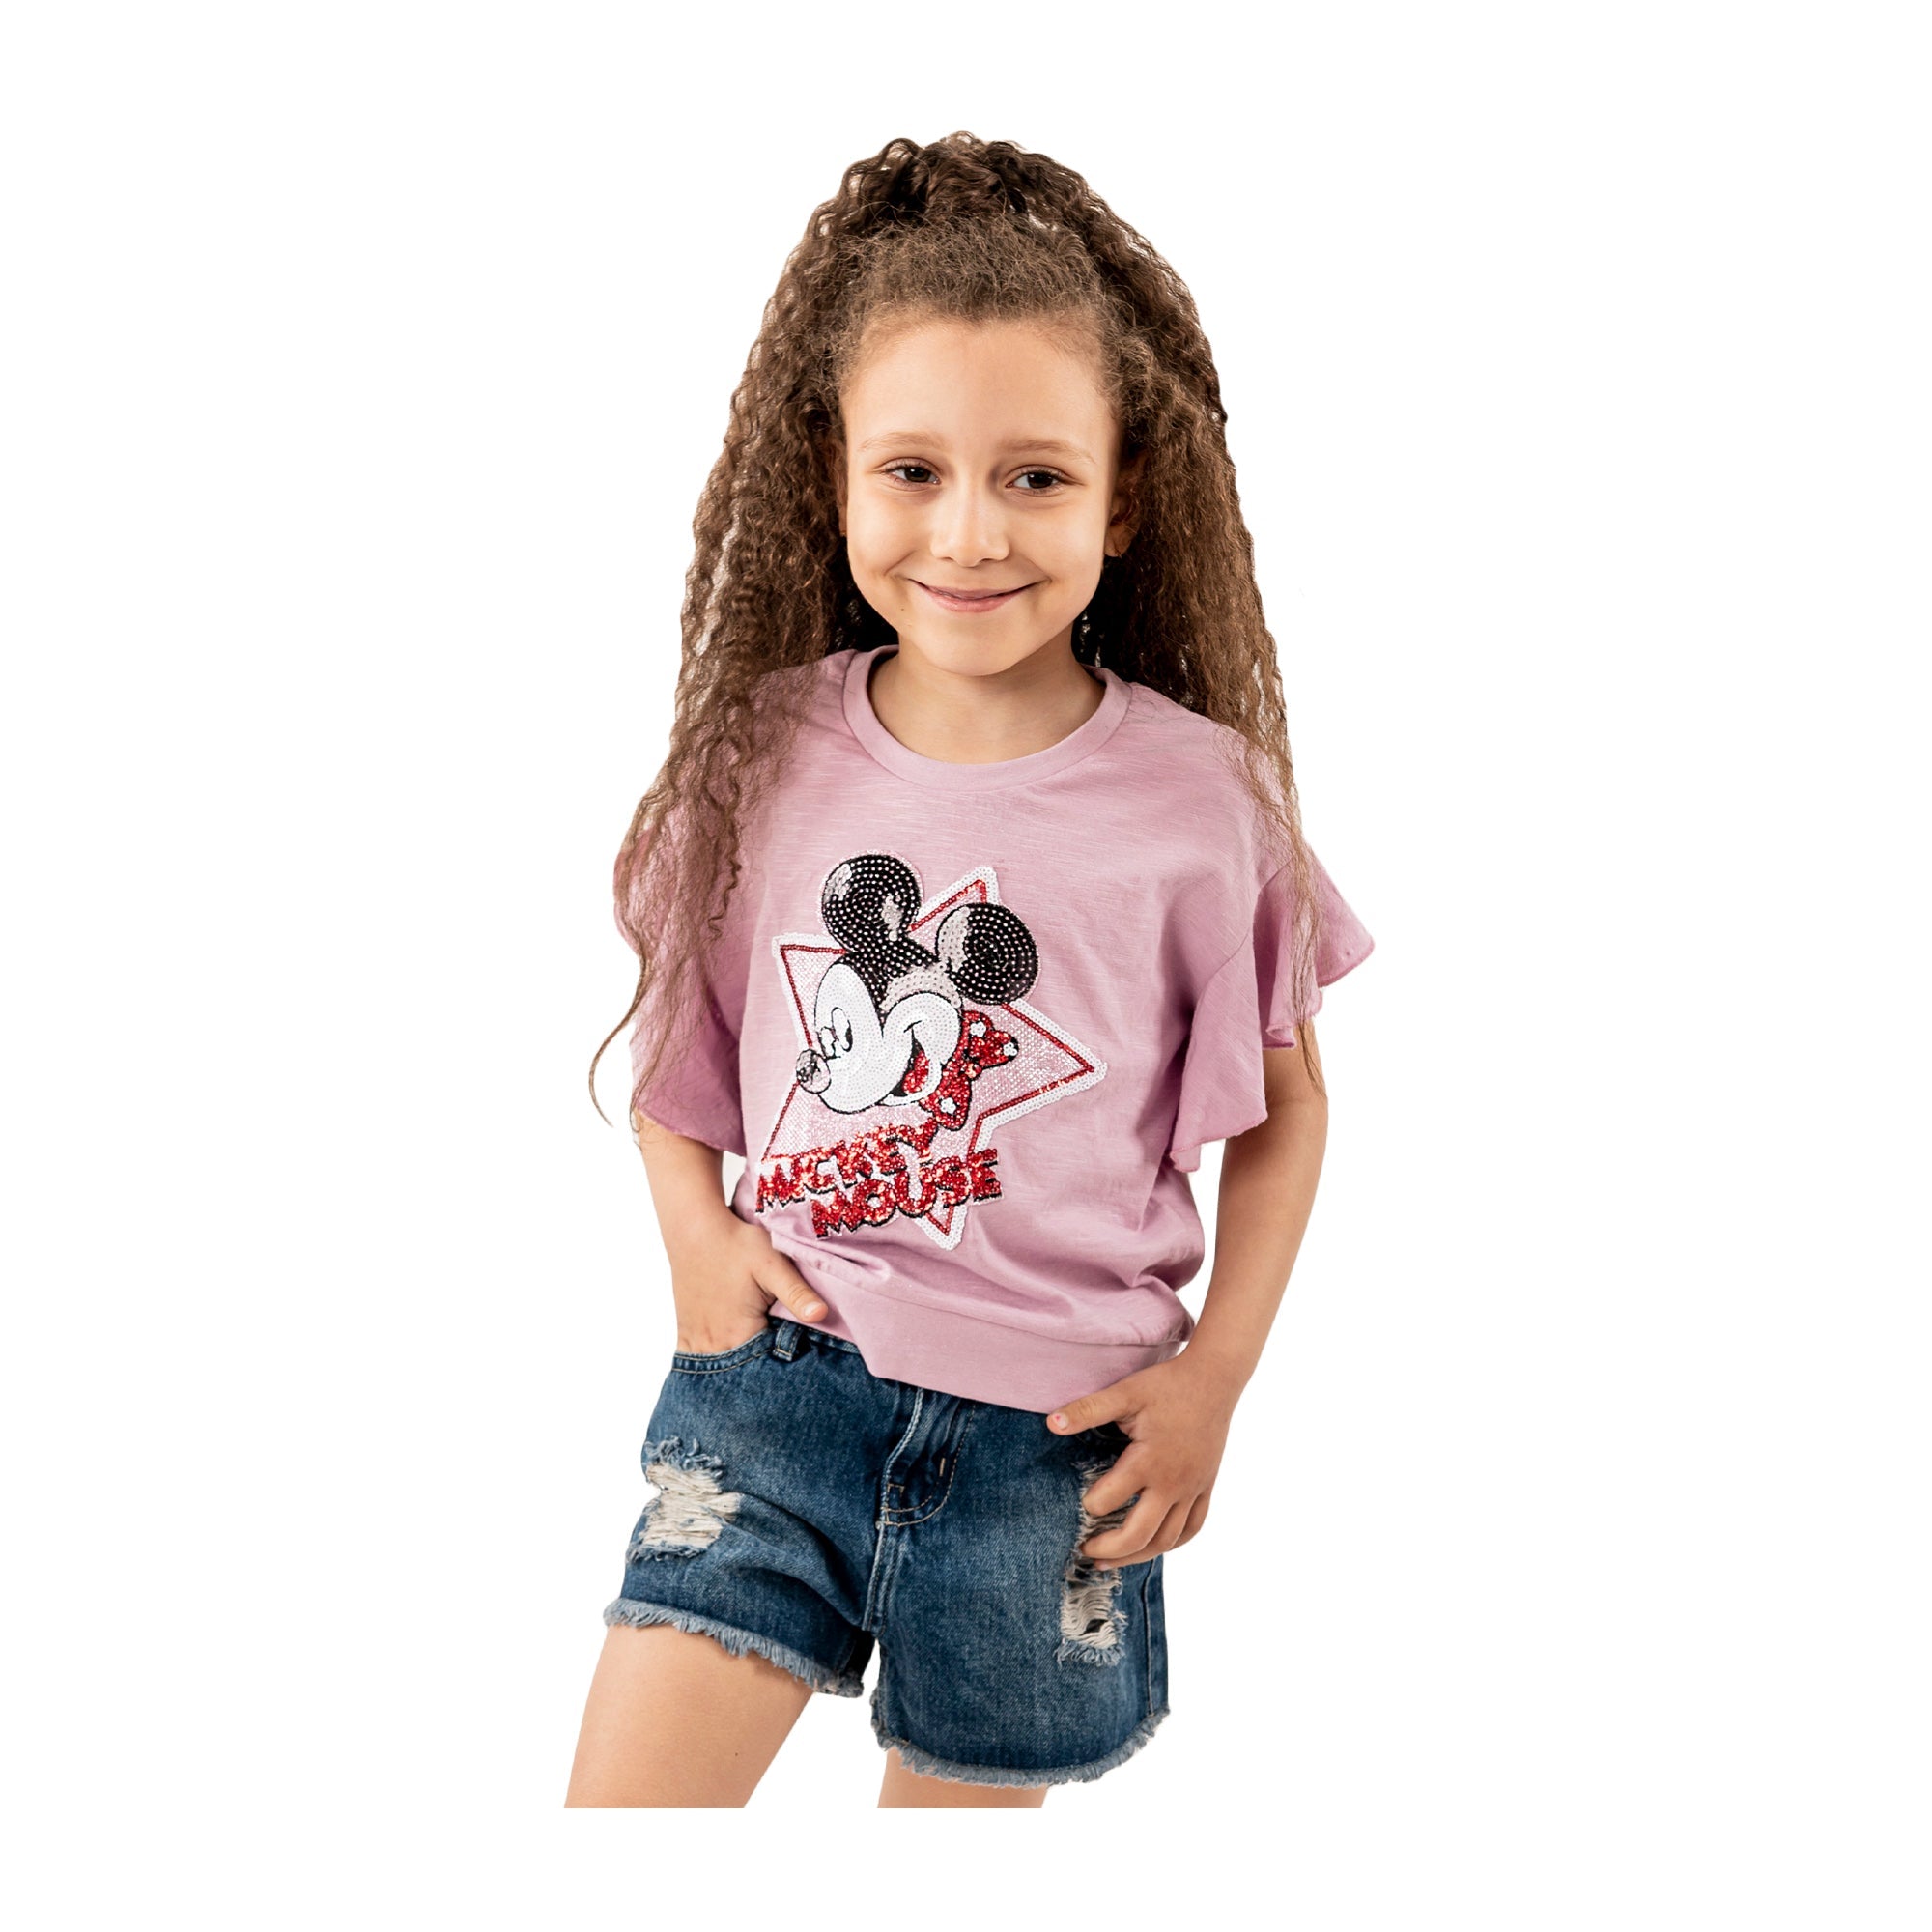 Venti T-Shirt Ruffle Sleeve With Sequin Minnie Pink for Girl404041, Target Gender: Girls, Color Family: Multicolor, Material: Cotton, Target Age: 12 - 18 Months